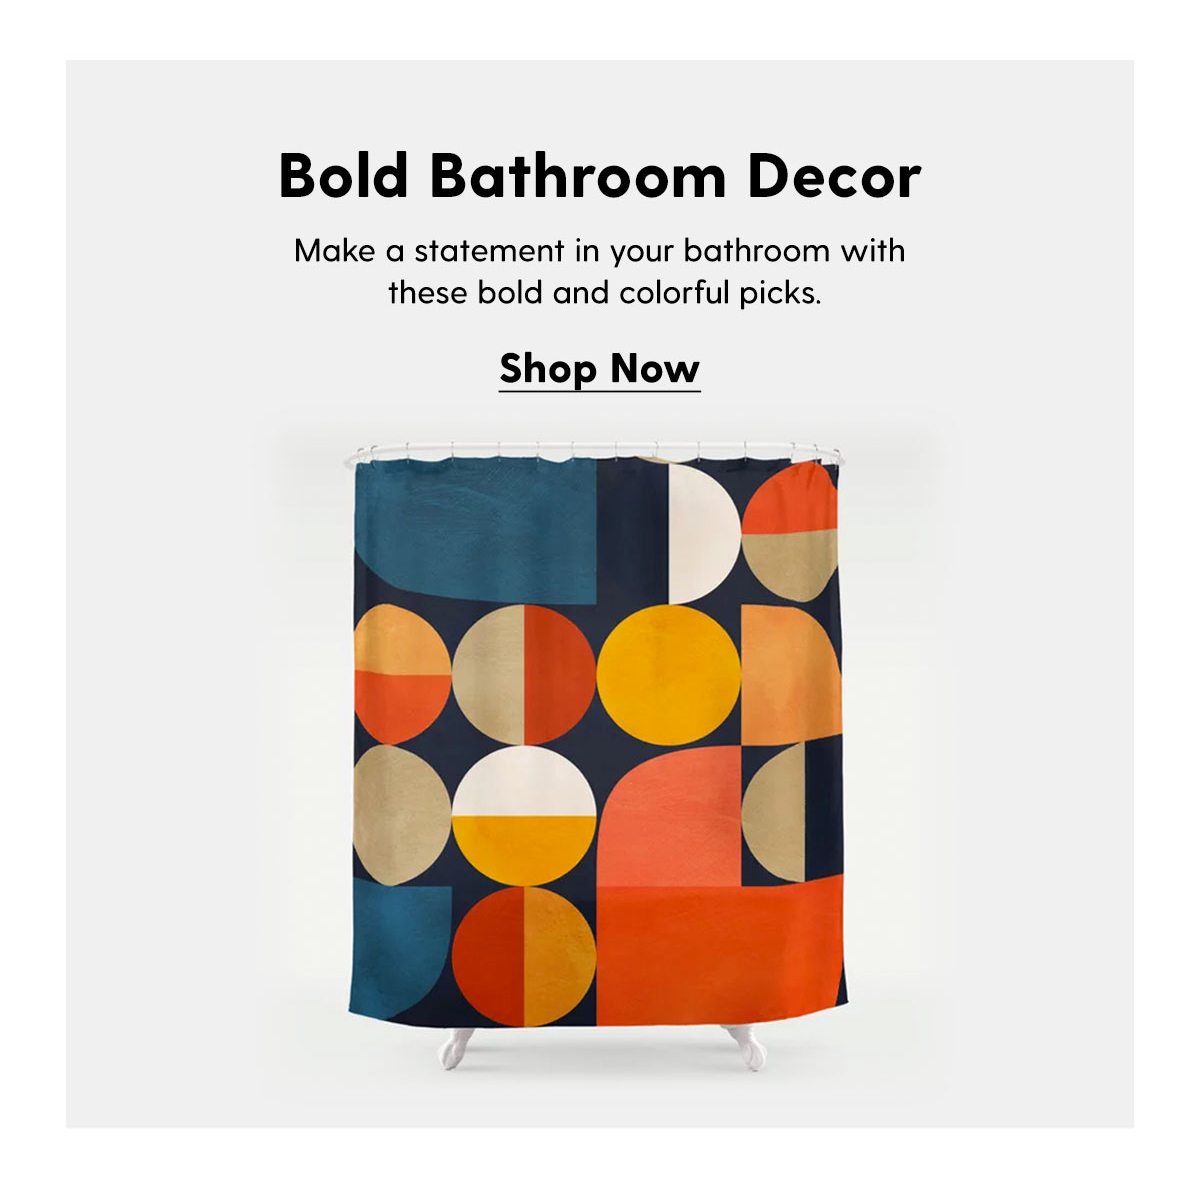 Bold Bathroom Decor Make a statement in your bathroom with these bold and colorful picks. Shop Now